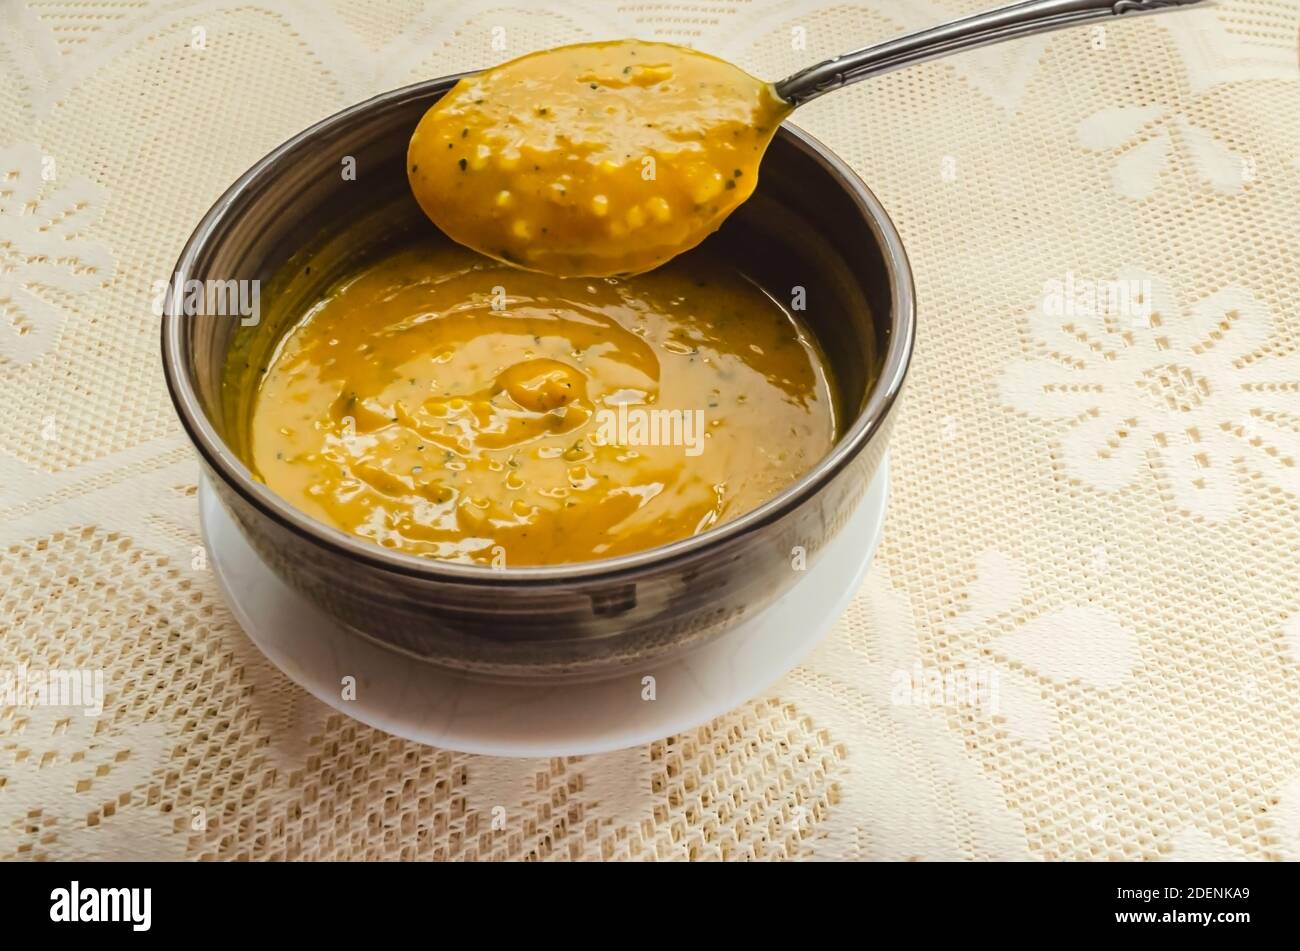 A spoon is lifting thick smooth pumpkin soup from a bowl that is in a small white plate on a lace tablecloth. Stock Photo